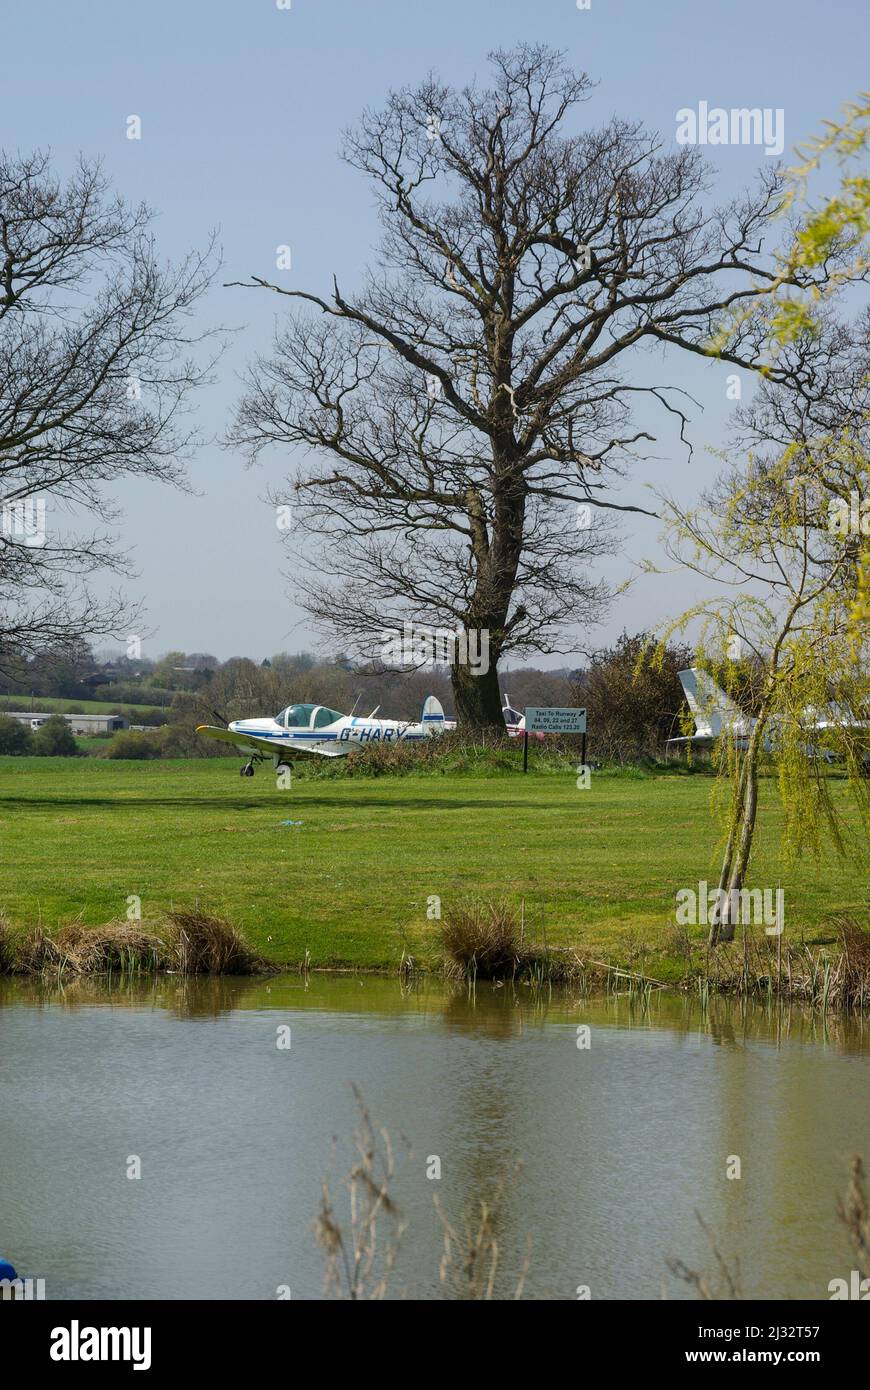 Great Oakley airfield in rural Essex, UK. Planes parked among the trees and ponds of the countryside airstrip Stock Photo